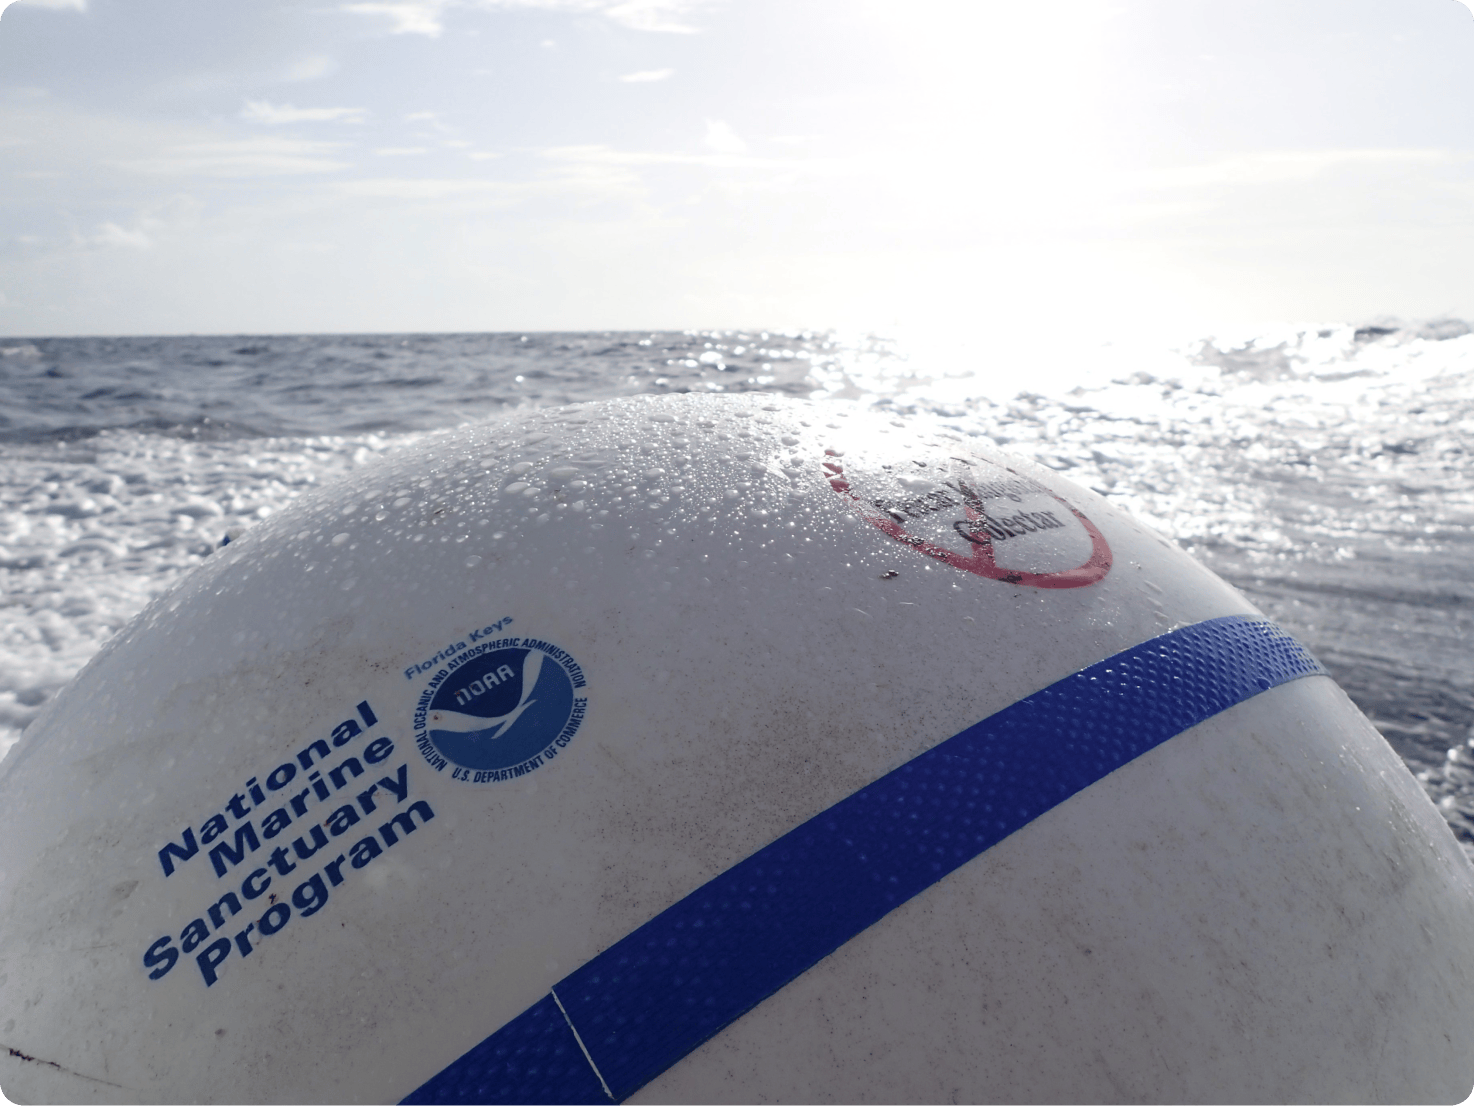 Buoy floating in the ocean with the National Marine Sanctuary Program logo on the front.